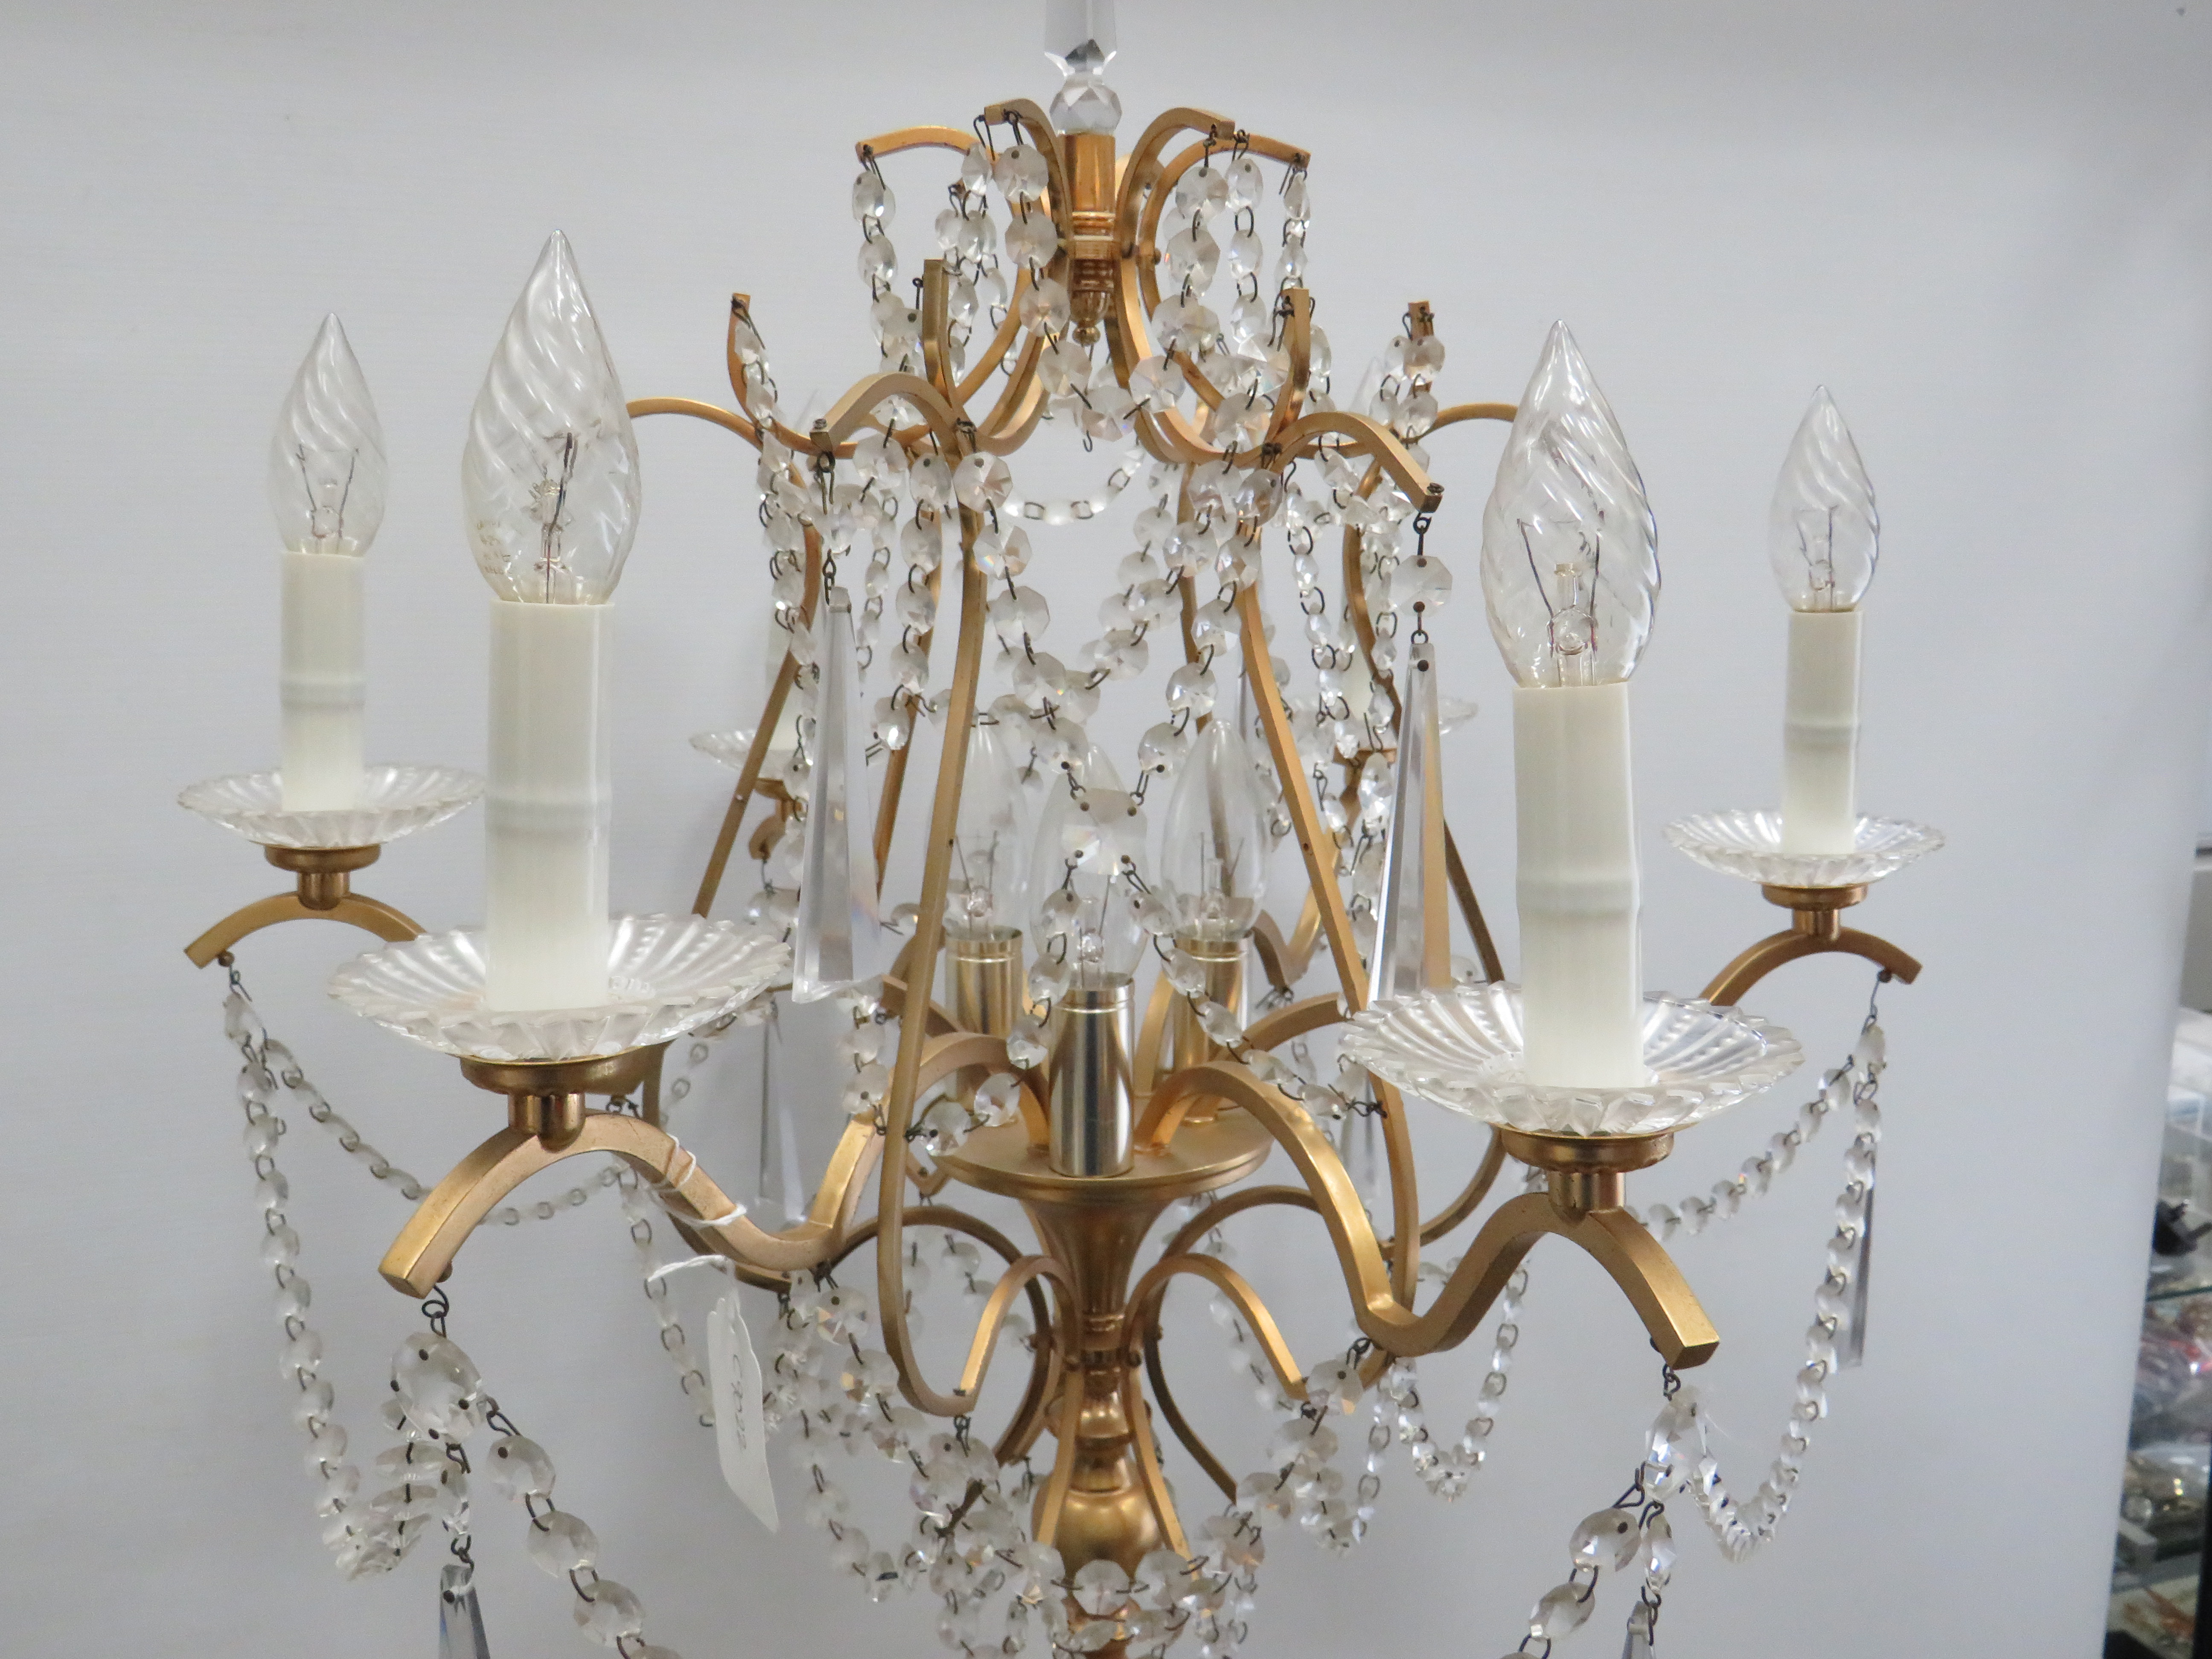 Brushed metal brass effect Standard lamp with 9 Candle bulbs and hanging glass lustres. Approx 67 in - Image 5 of 7